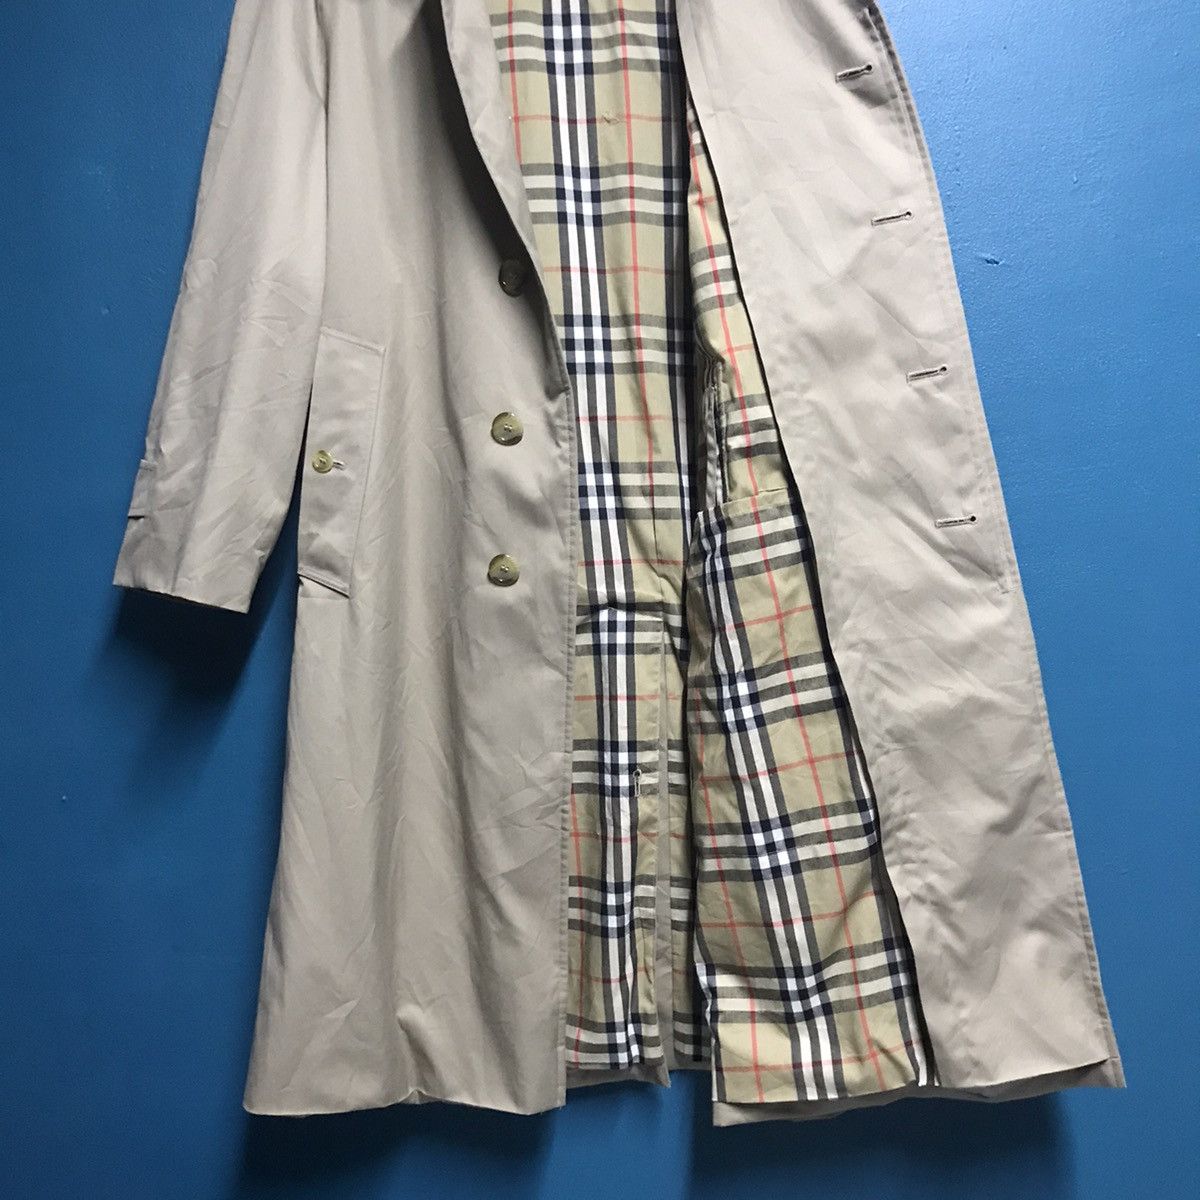 Burberry Prorsum Vintage burberry nova check trench coat with wool lining Size US L / EU 52-54 / 3 - 9 Thumbnail